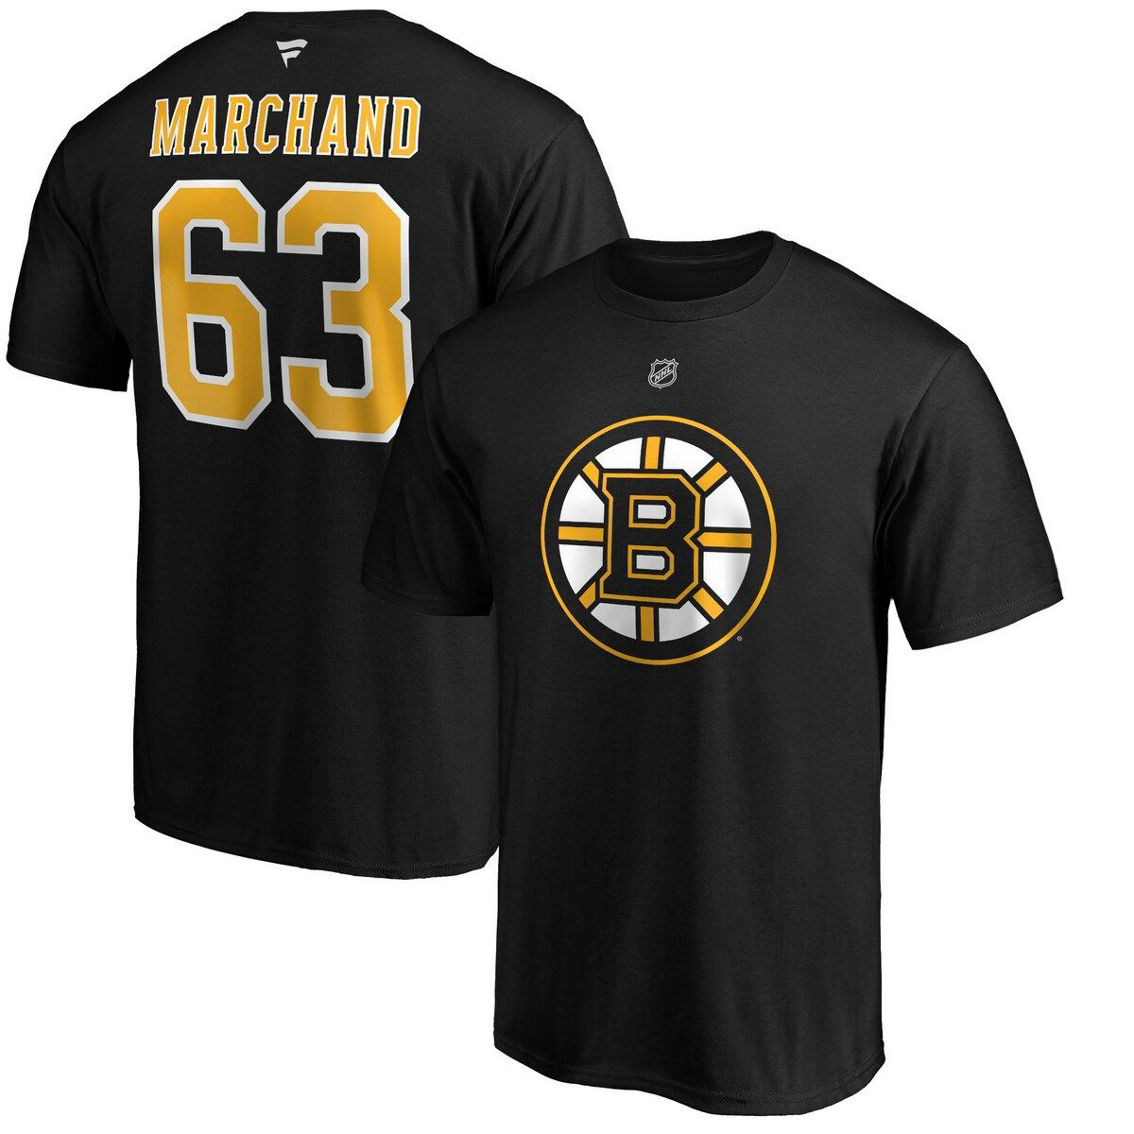 Fanatics Branded Men's Brad Marchand Black Boston Bruins Team Authentic Stack Name & Number T-Shirt - Image 2 of 4